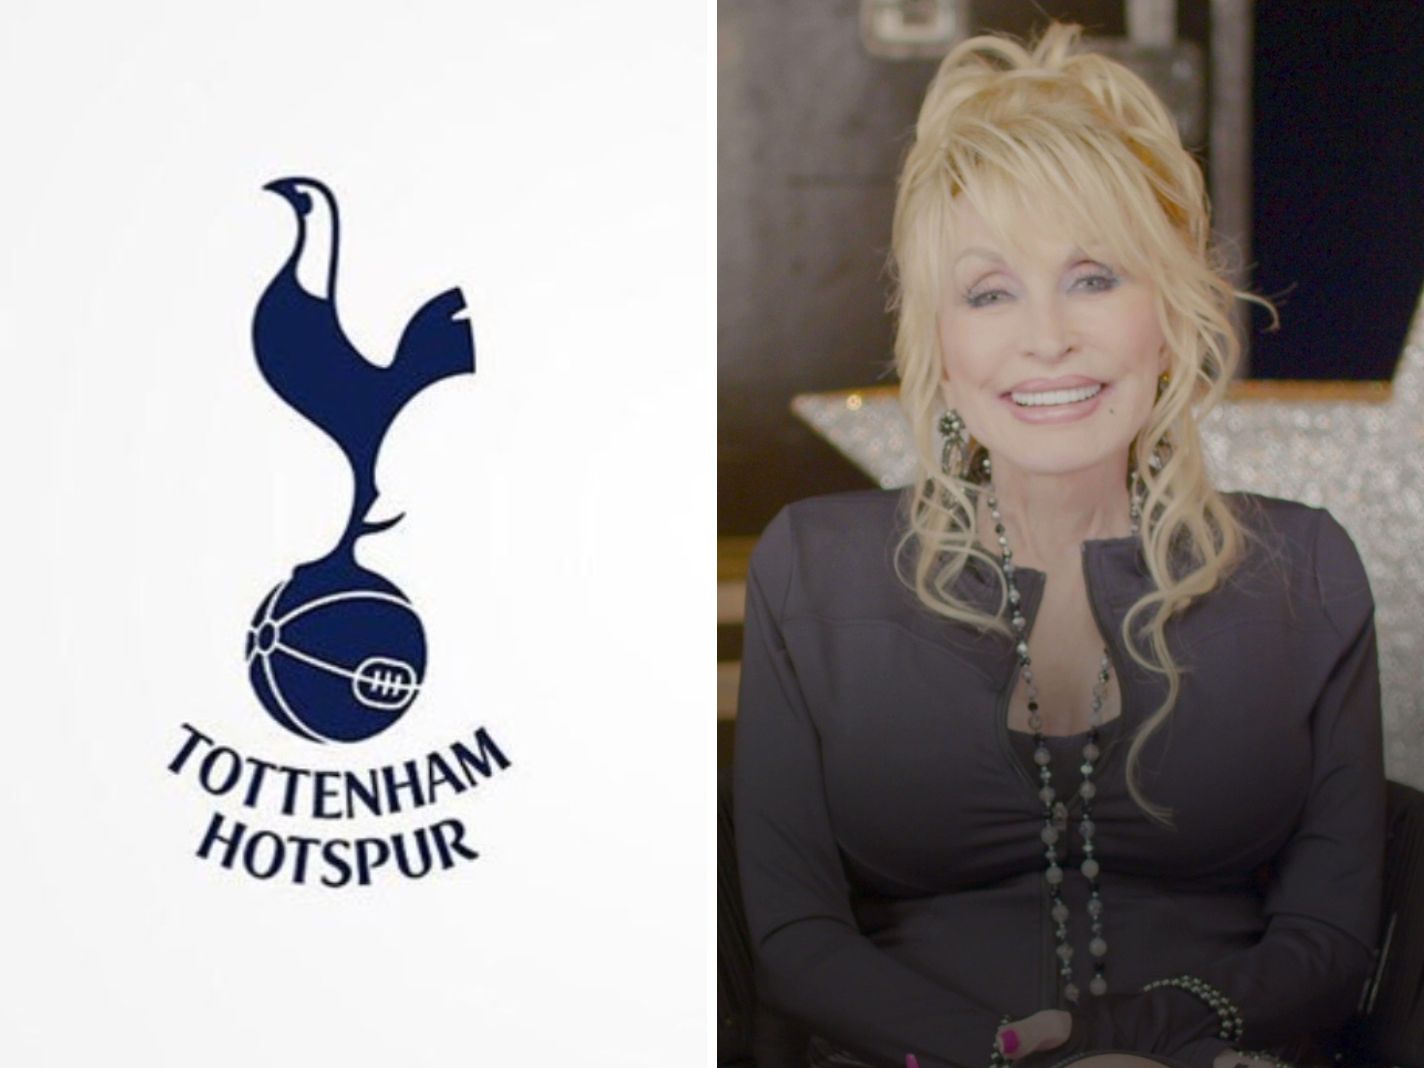 All About The Dolly Parton Inspired Chant Taking Over Tottenham Hotspur These Days